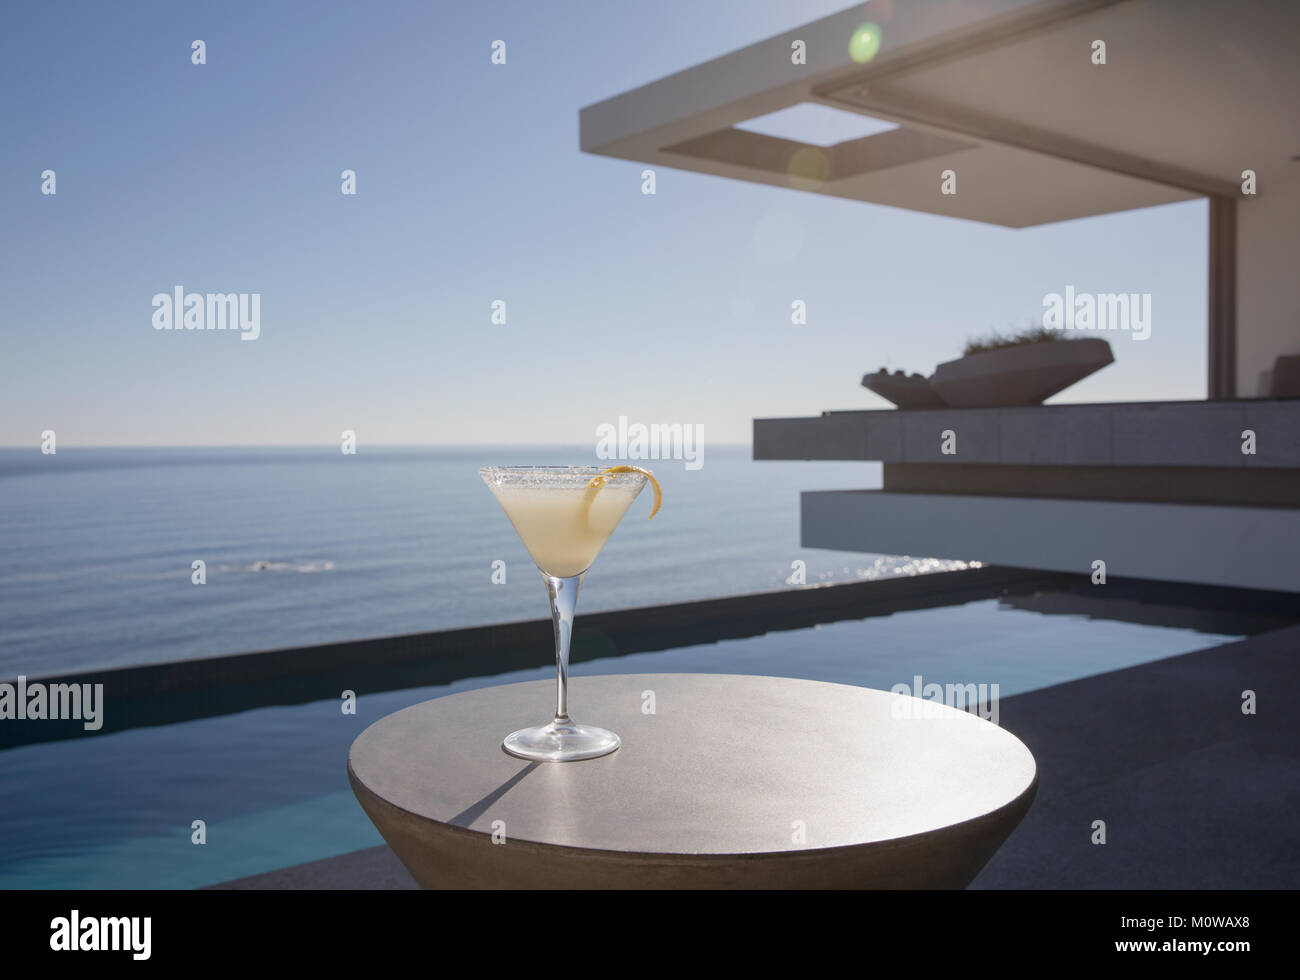 Lemon cocktail in martini glass on sunny luxury patio with ocean view Stock Photo